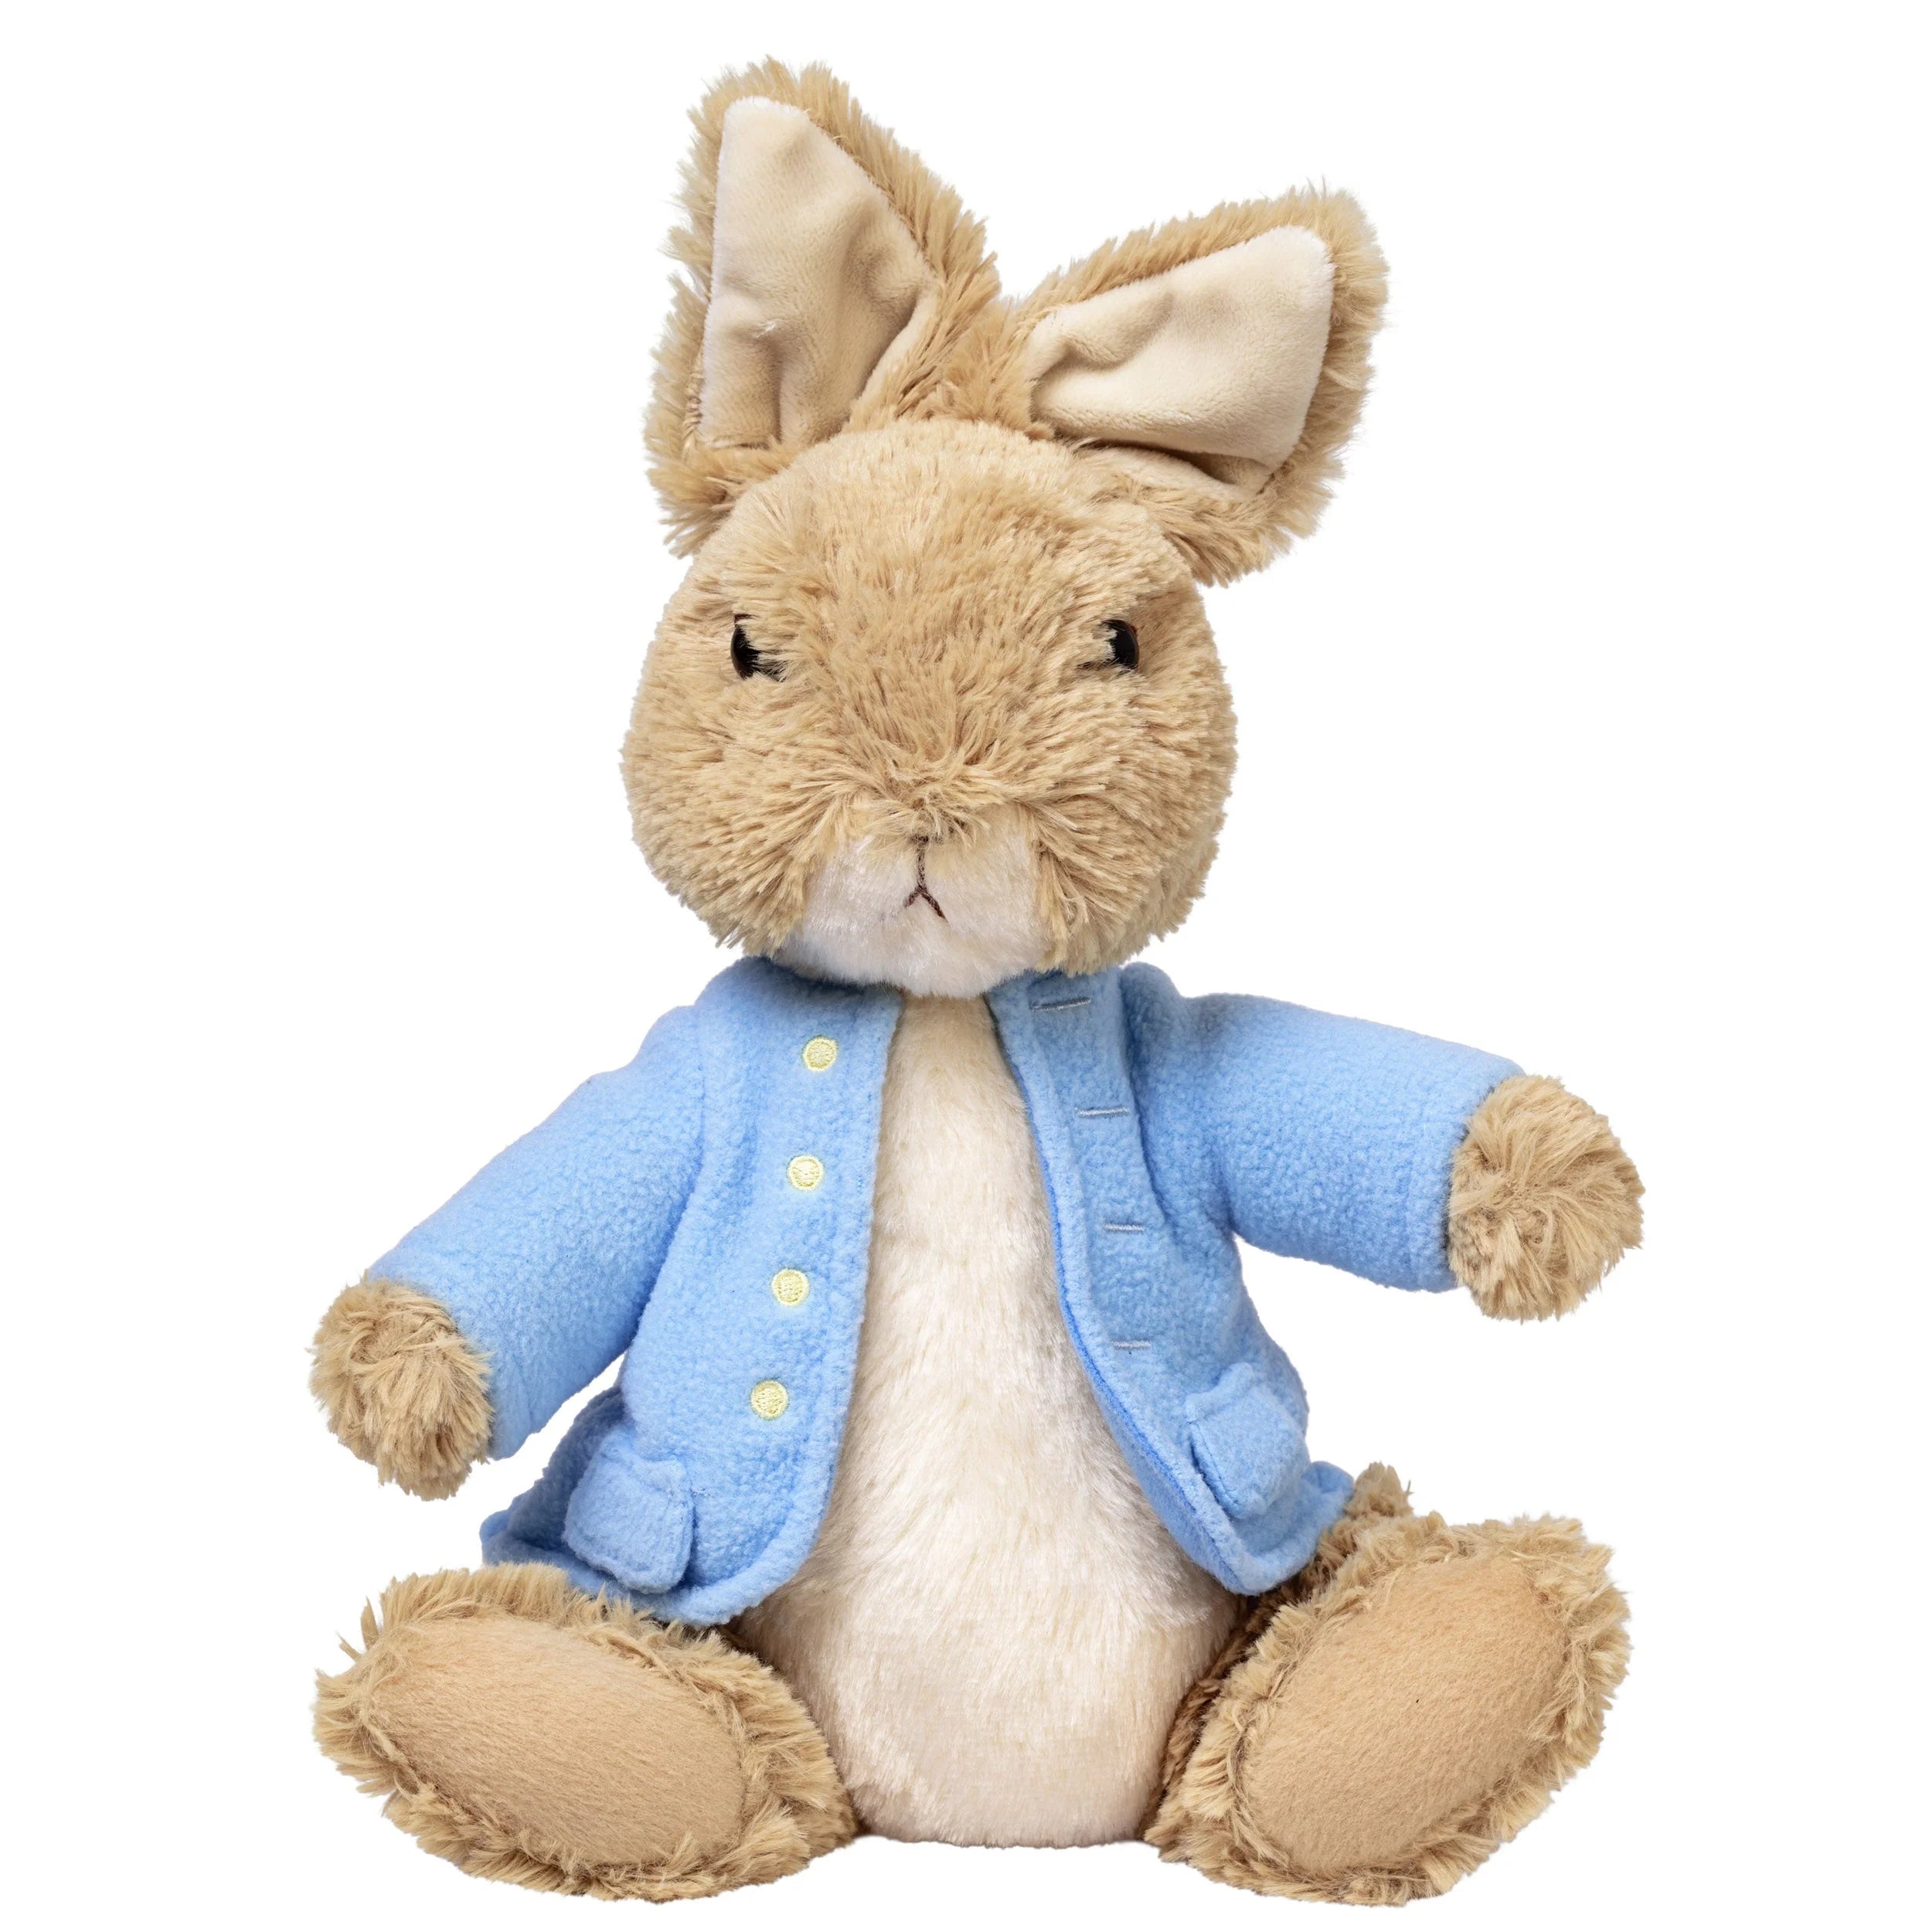 Peter Rabbit Gift Set with Tea Caddy and Plush Toy - New English Teas